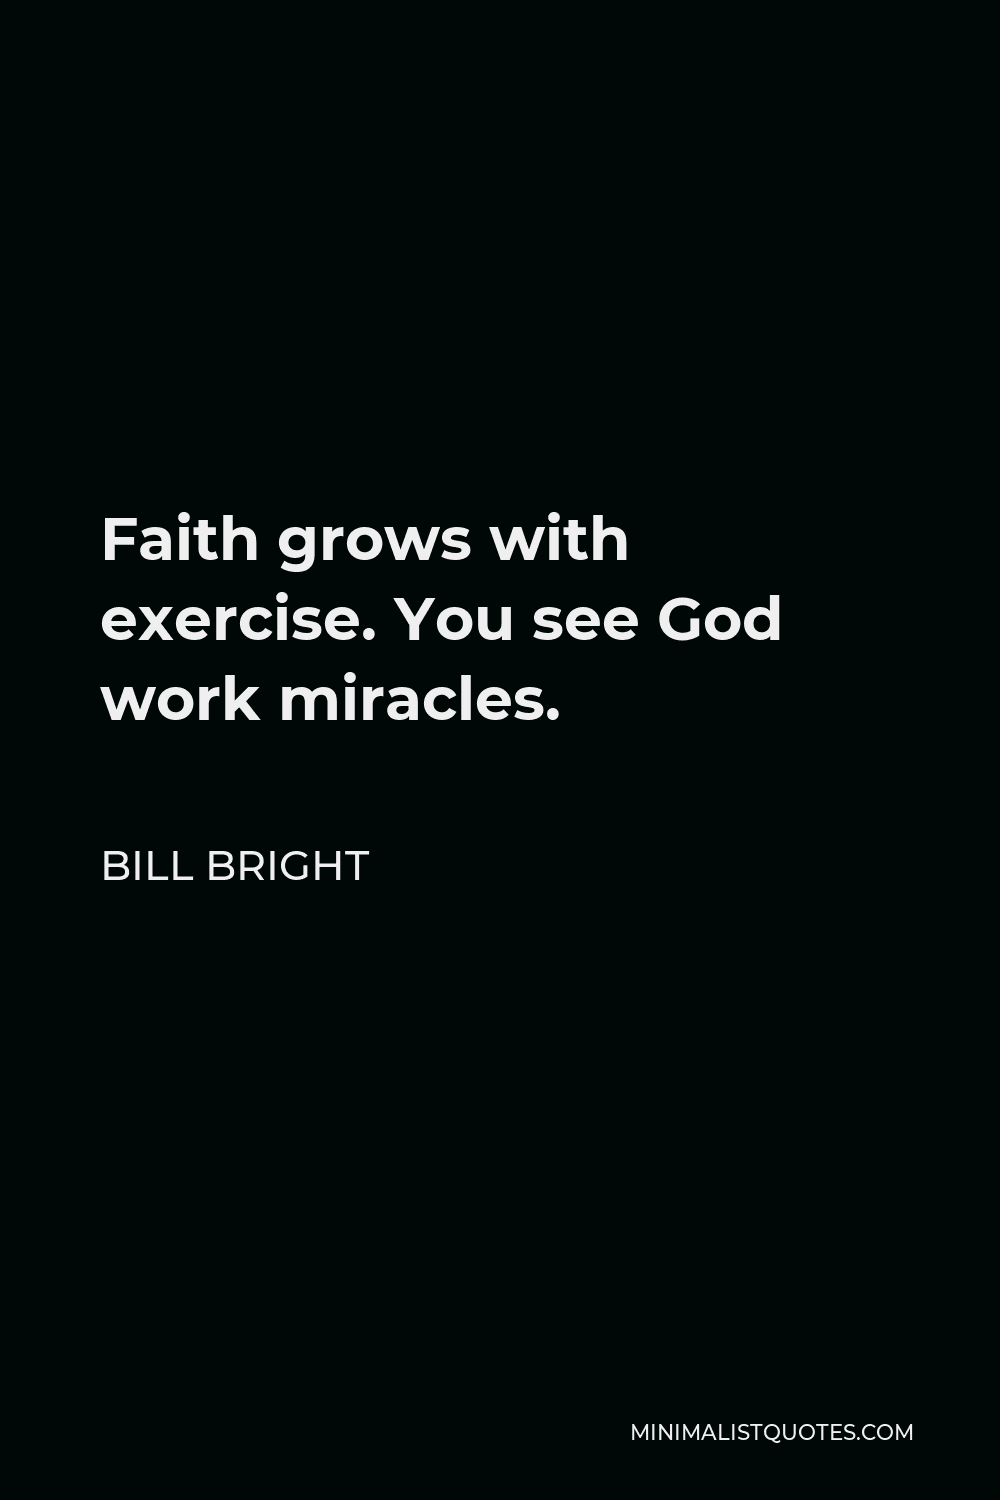 Bill Bright Quote - Faith grows with exercise. You see God work miracles.